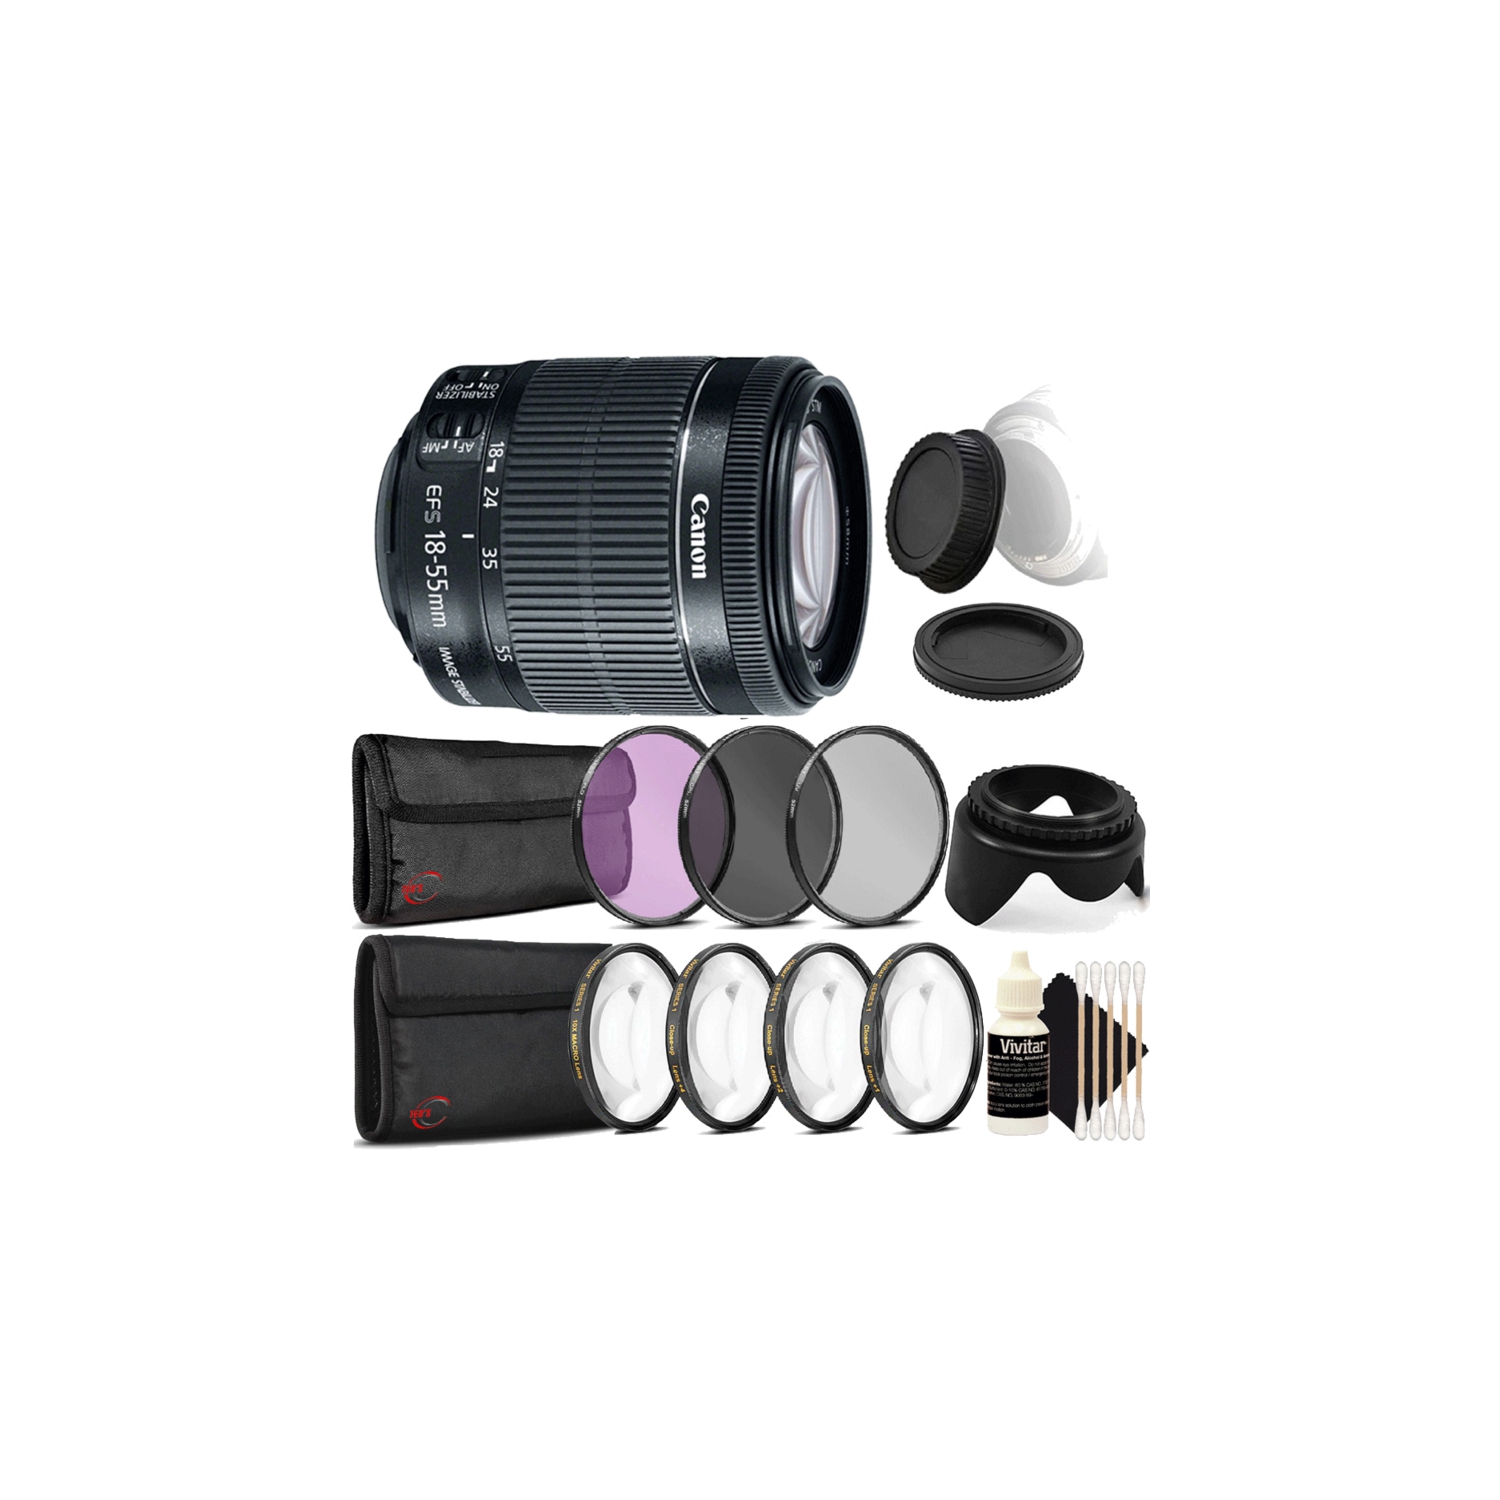 Canon EF-S 18-55mm f/3.5-5.6 IS STM Lens w/ Accessory Kit For Canon 80D & 1300D - International Version w/Seller Warranty